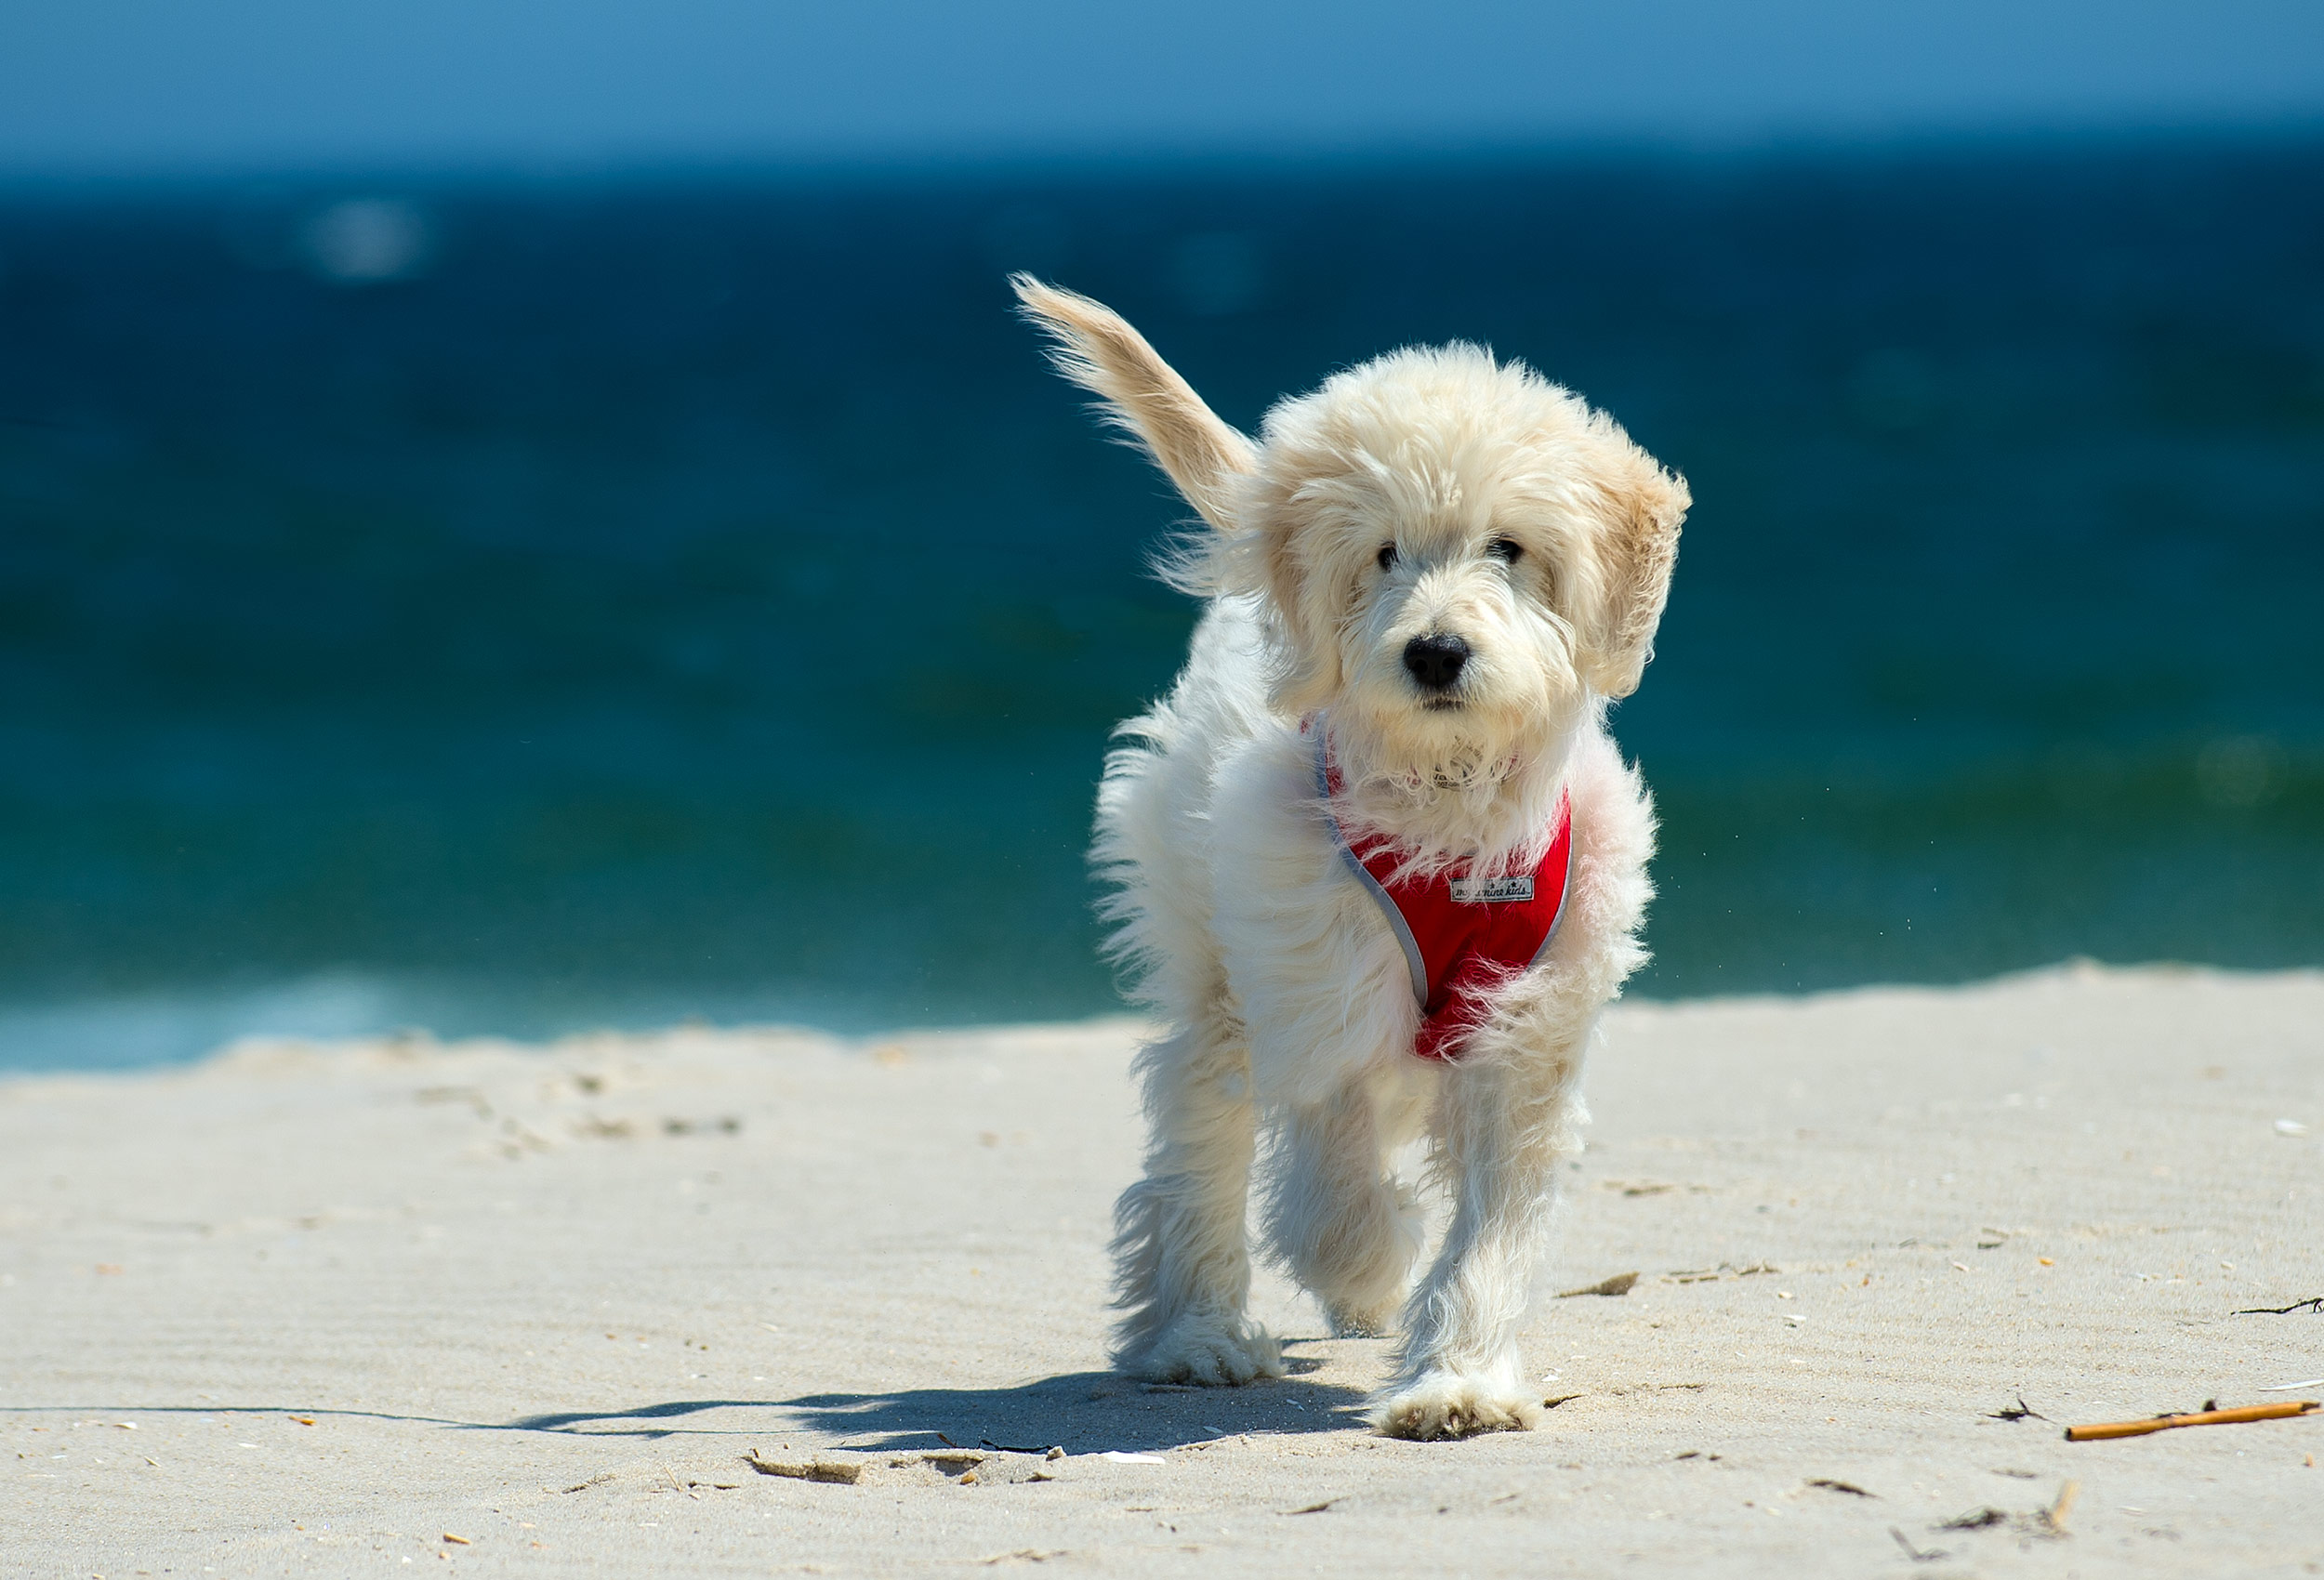 White puppy wearing red harness on beach with tropical ocean in background